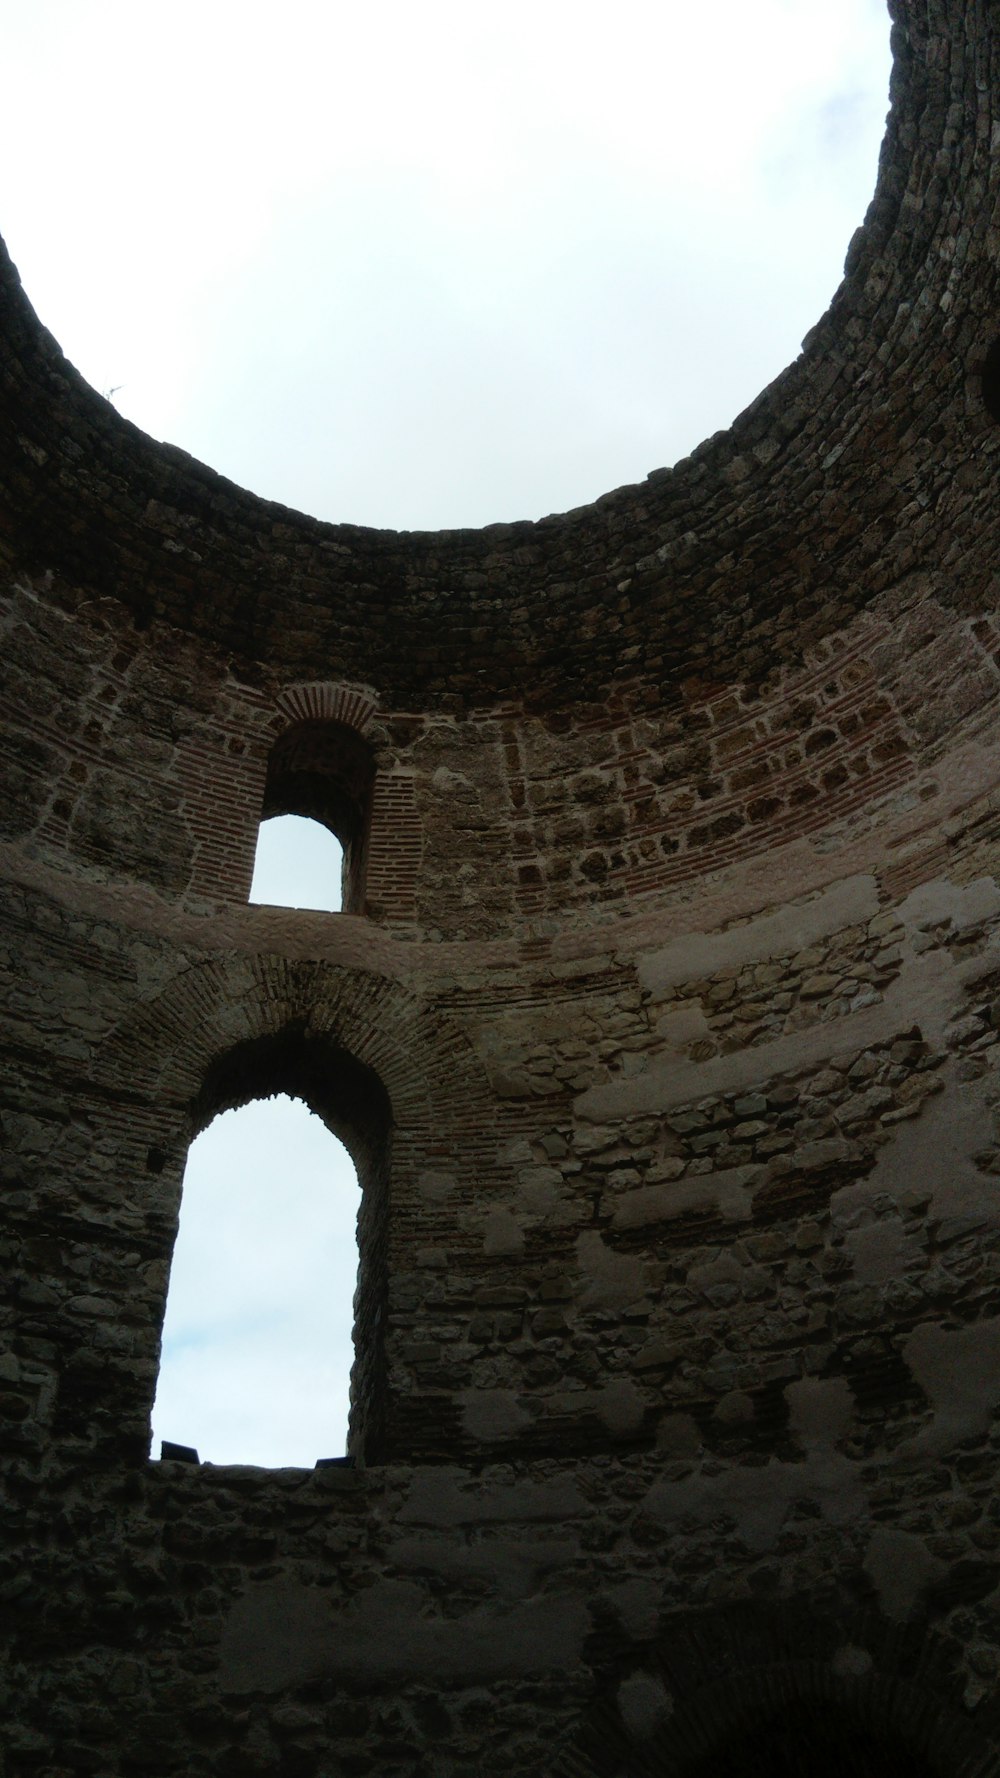 a view of the inside of an old brick building